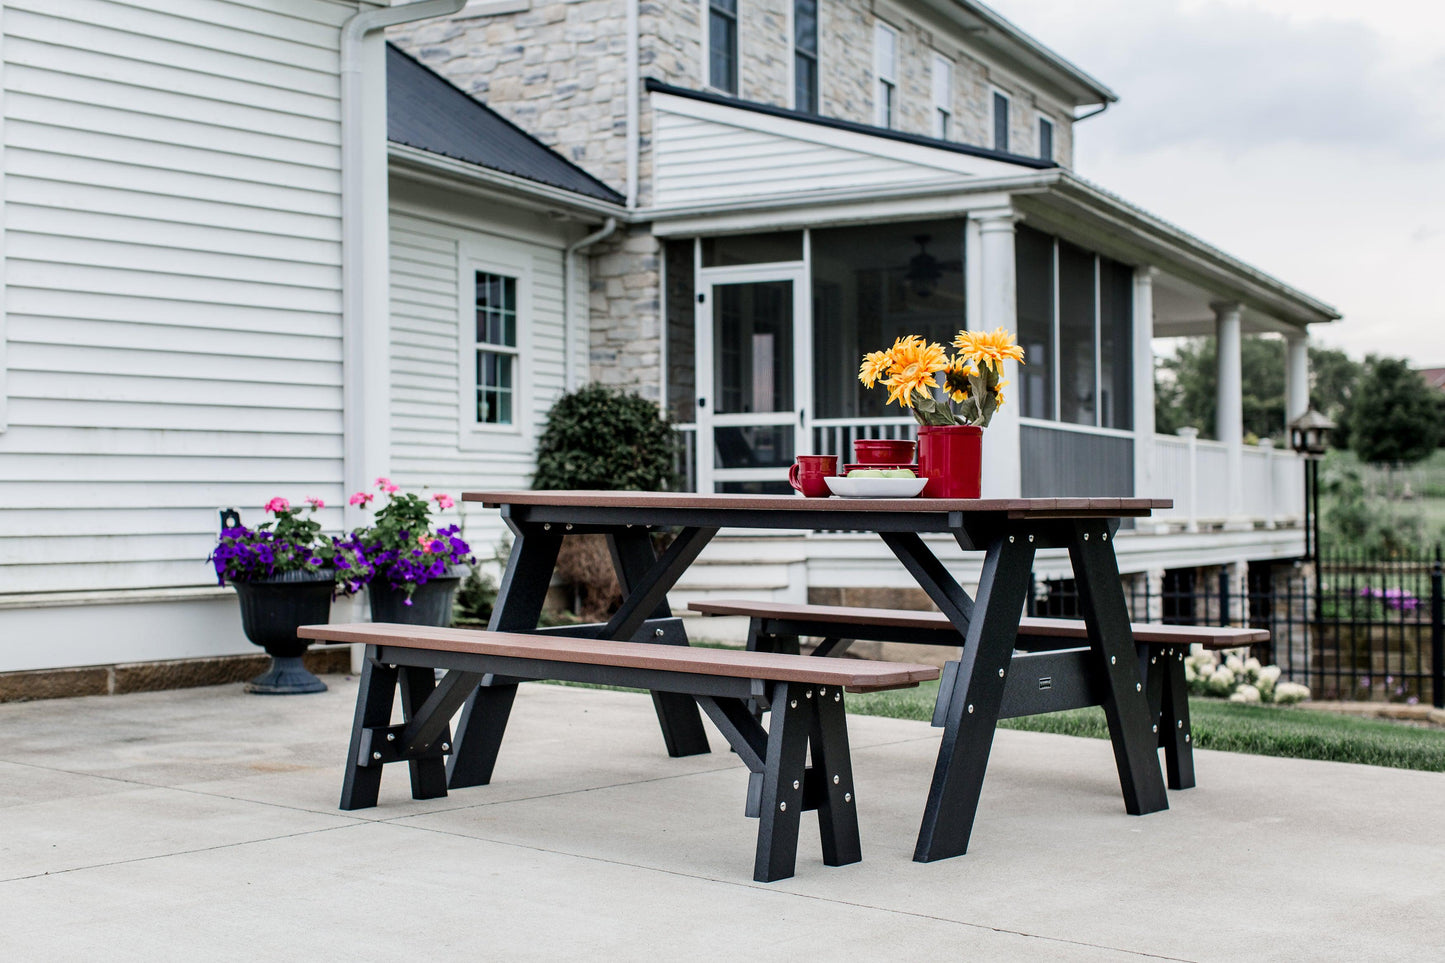 Wildridge Heritage Recycled Plastic Picnic Table with Unattached Benches - LEAD TIME TO SHIP 6 WEEKS OR LESS